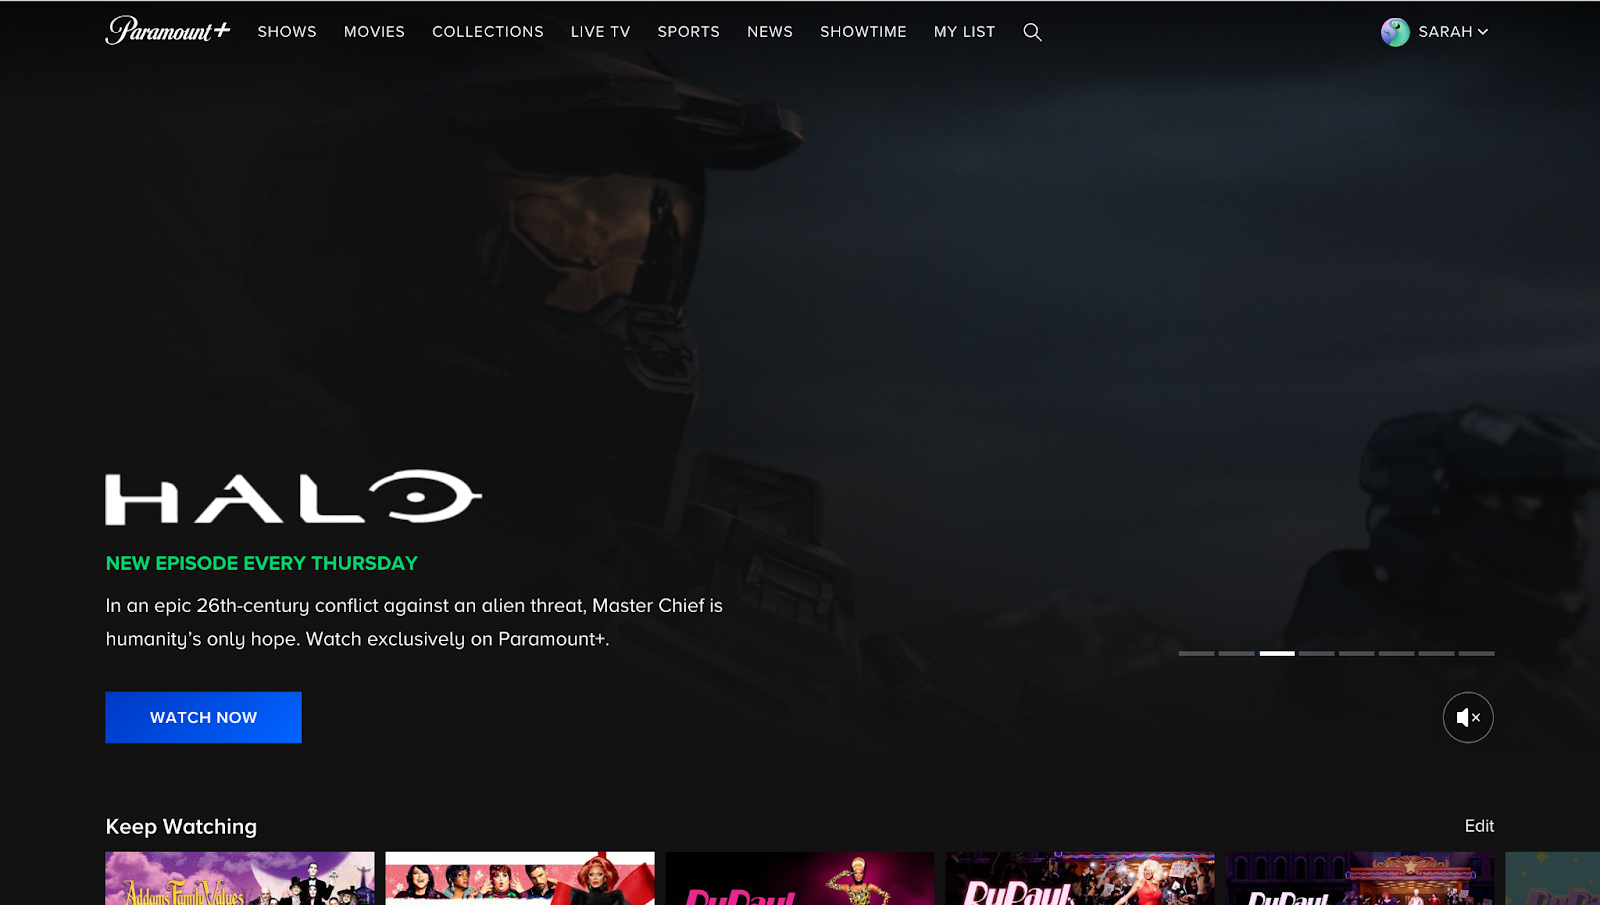 paramount+ home page featuring Halo